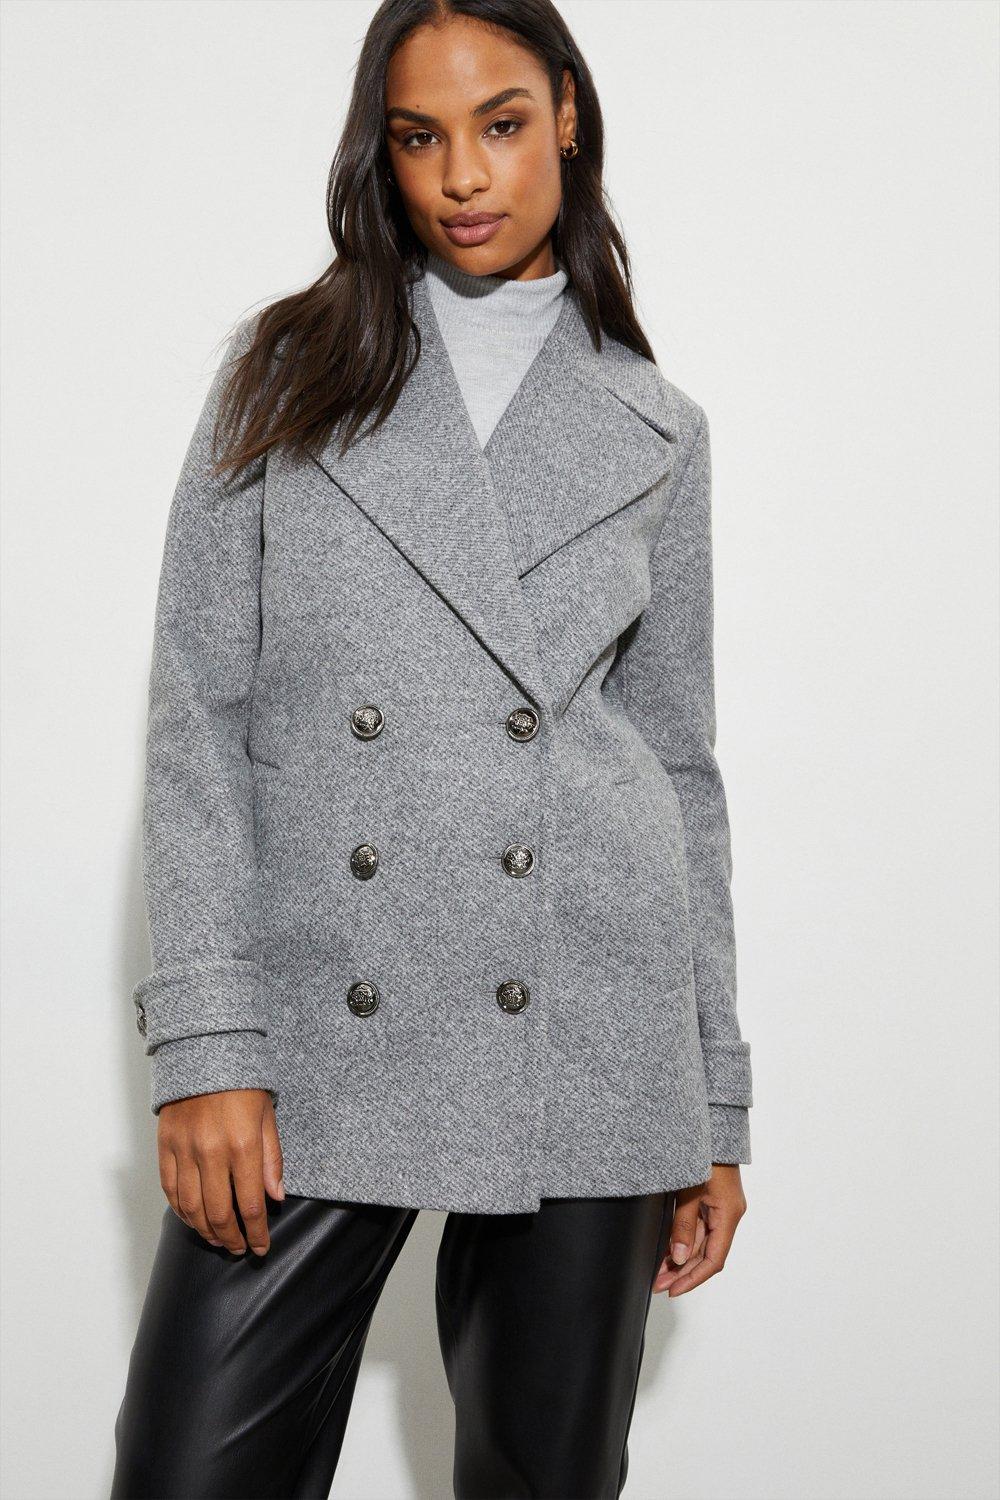 Women’s Military Button Peacoat - grey marl - 10